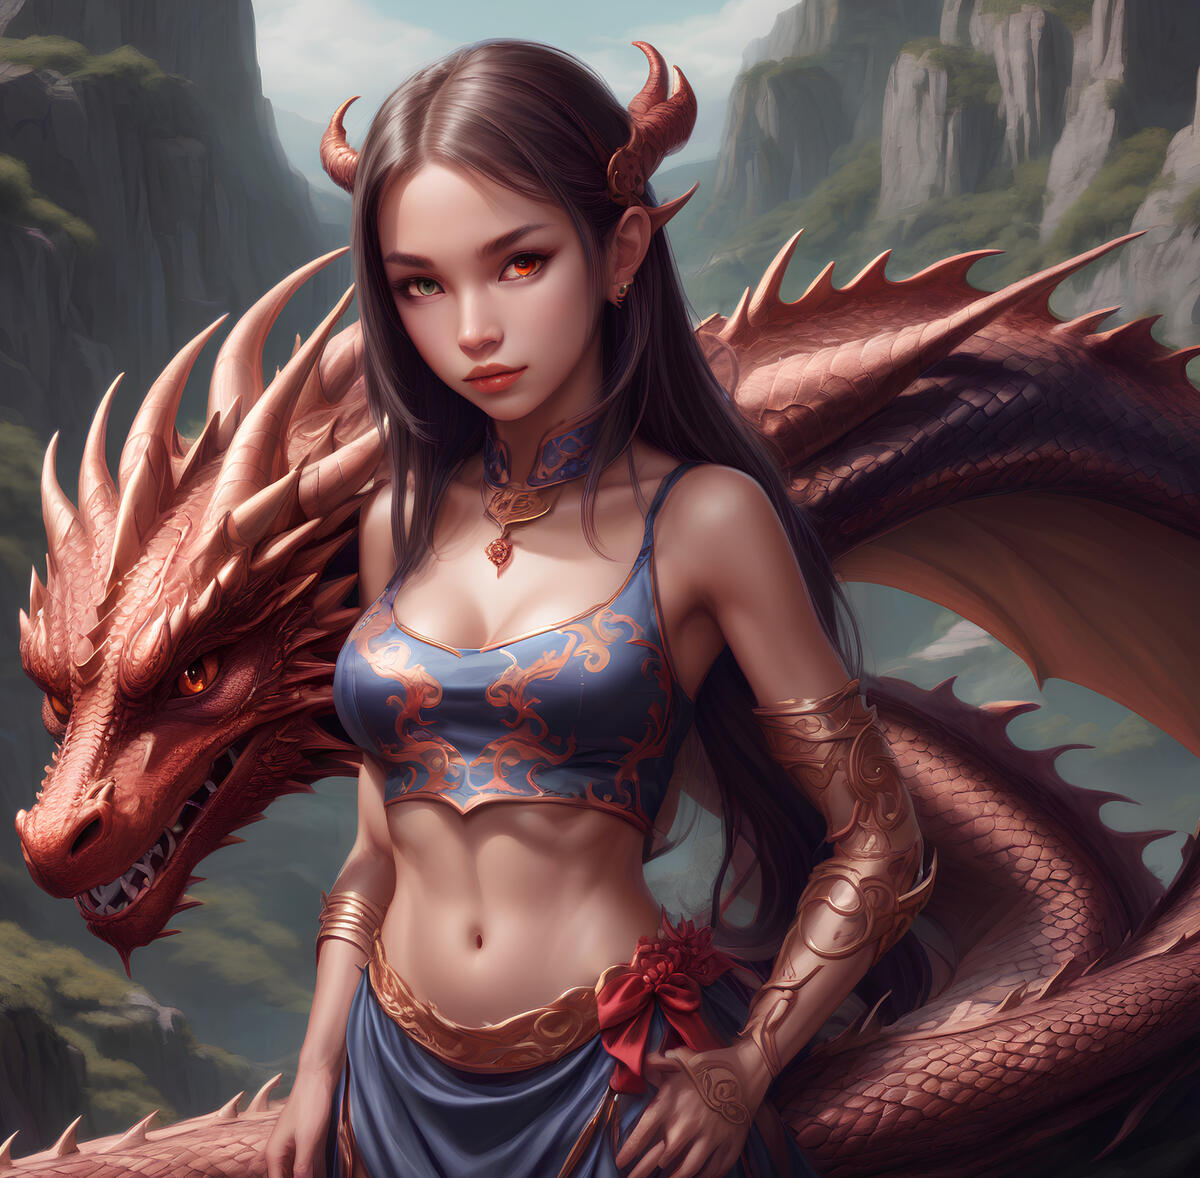 The girl and the dragon